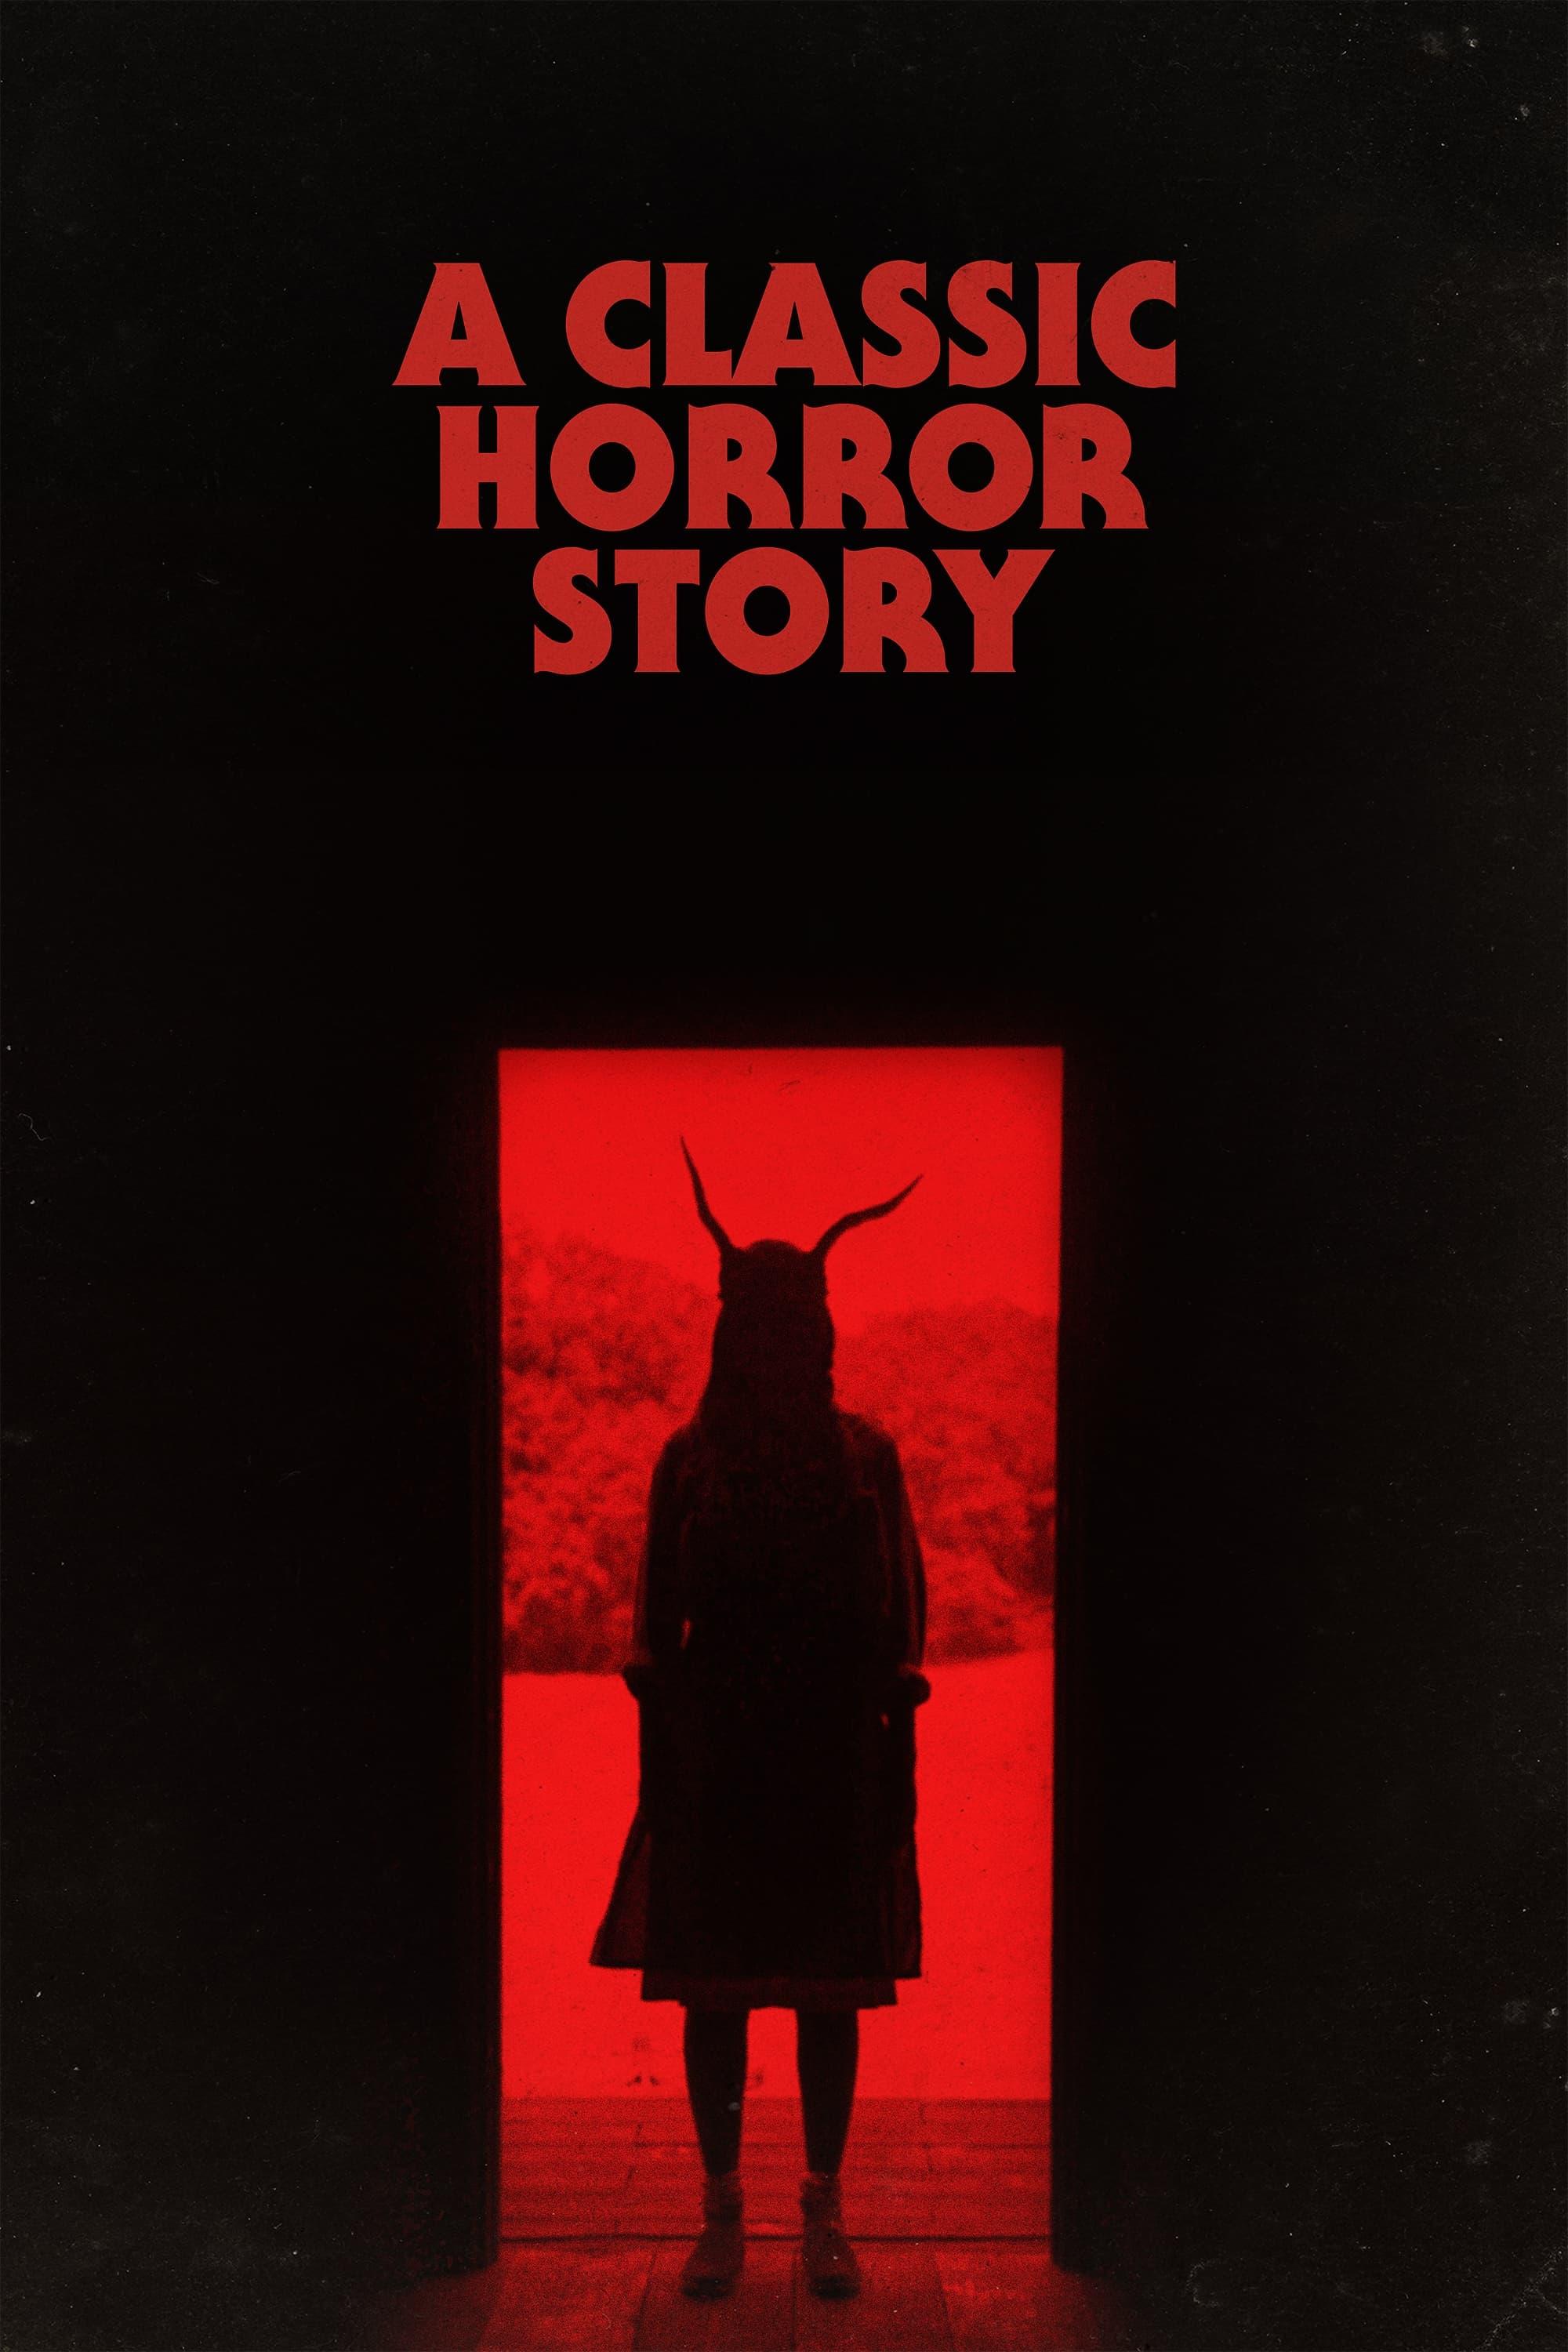 A Classic Horror Story poster